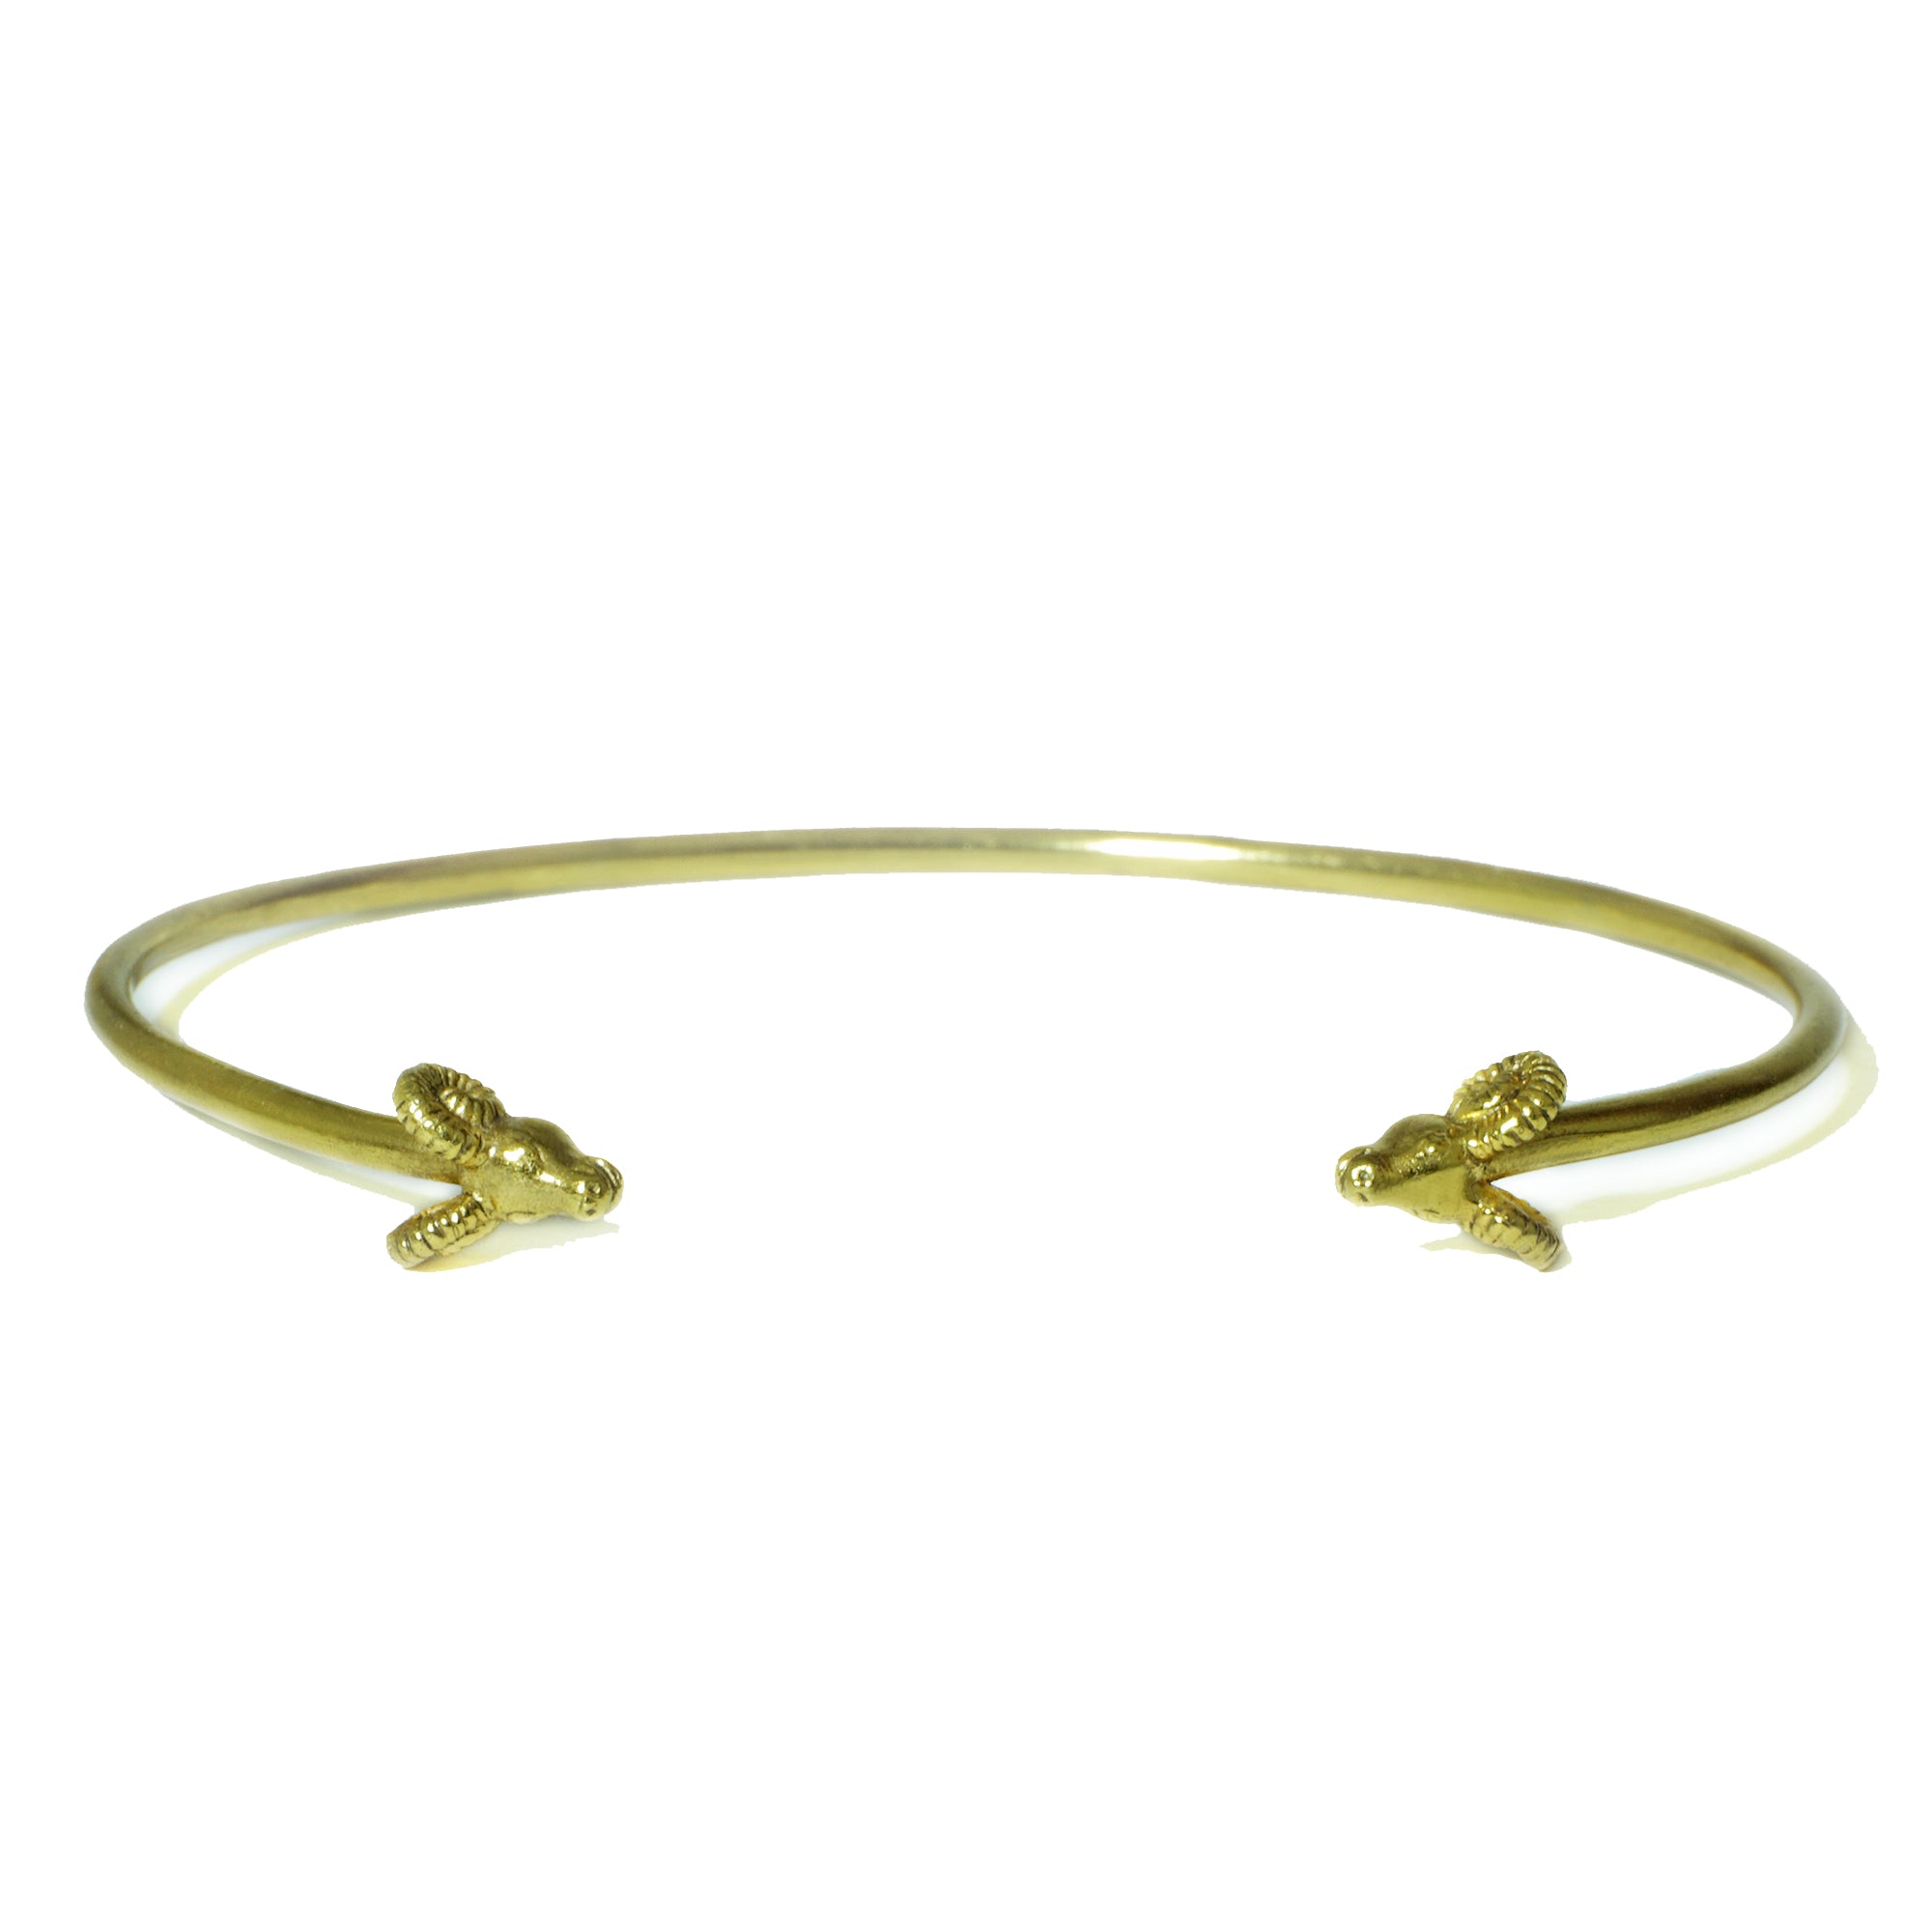 TIFFANY CO. CUFF BRACELET in yellow gold, engraved wi… | Drouot.com